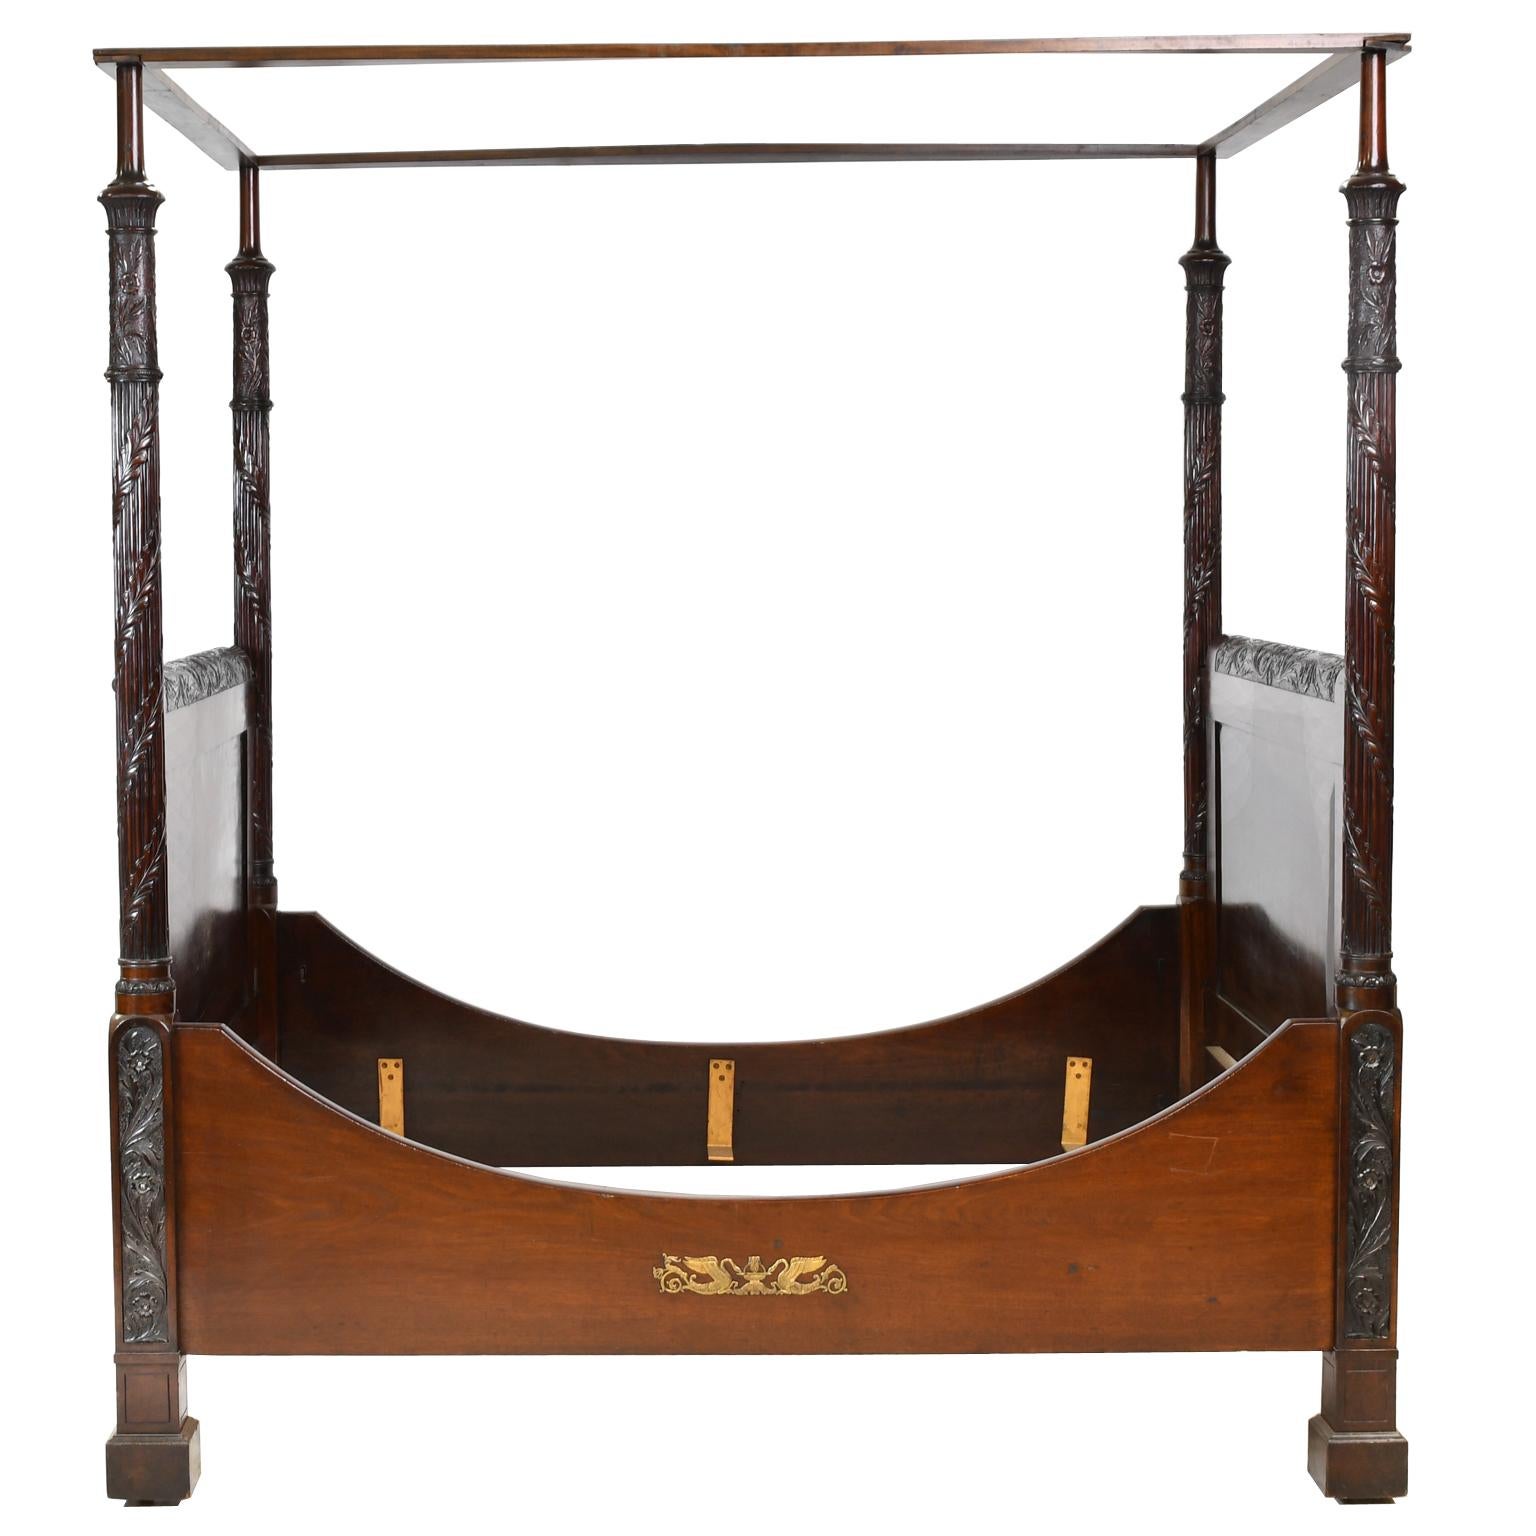 An exceptional American Federal sleigh bed with tester in fine West Indies/ Cuban mahogany with beautifully-articulated floral and acanthus-leaf carvings, along the crest of the headboard and footboard, and on the four posts, attributable to the